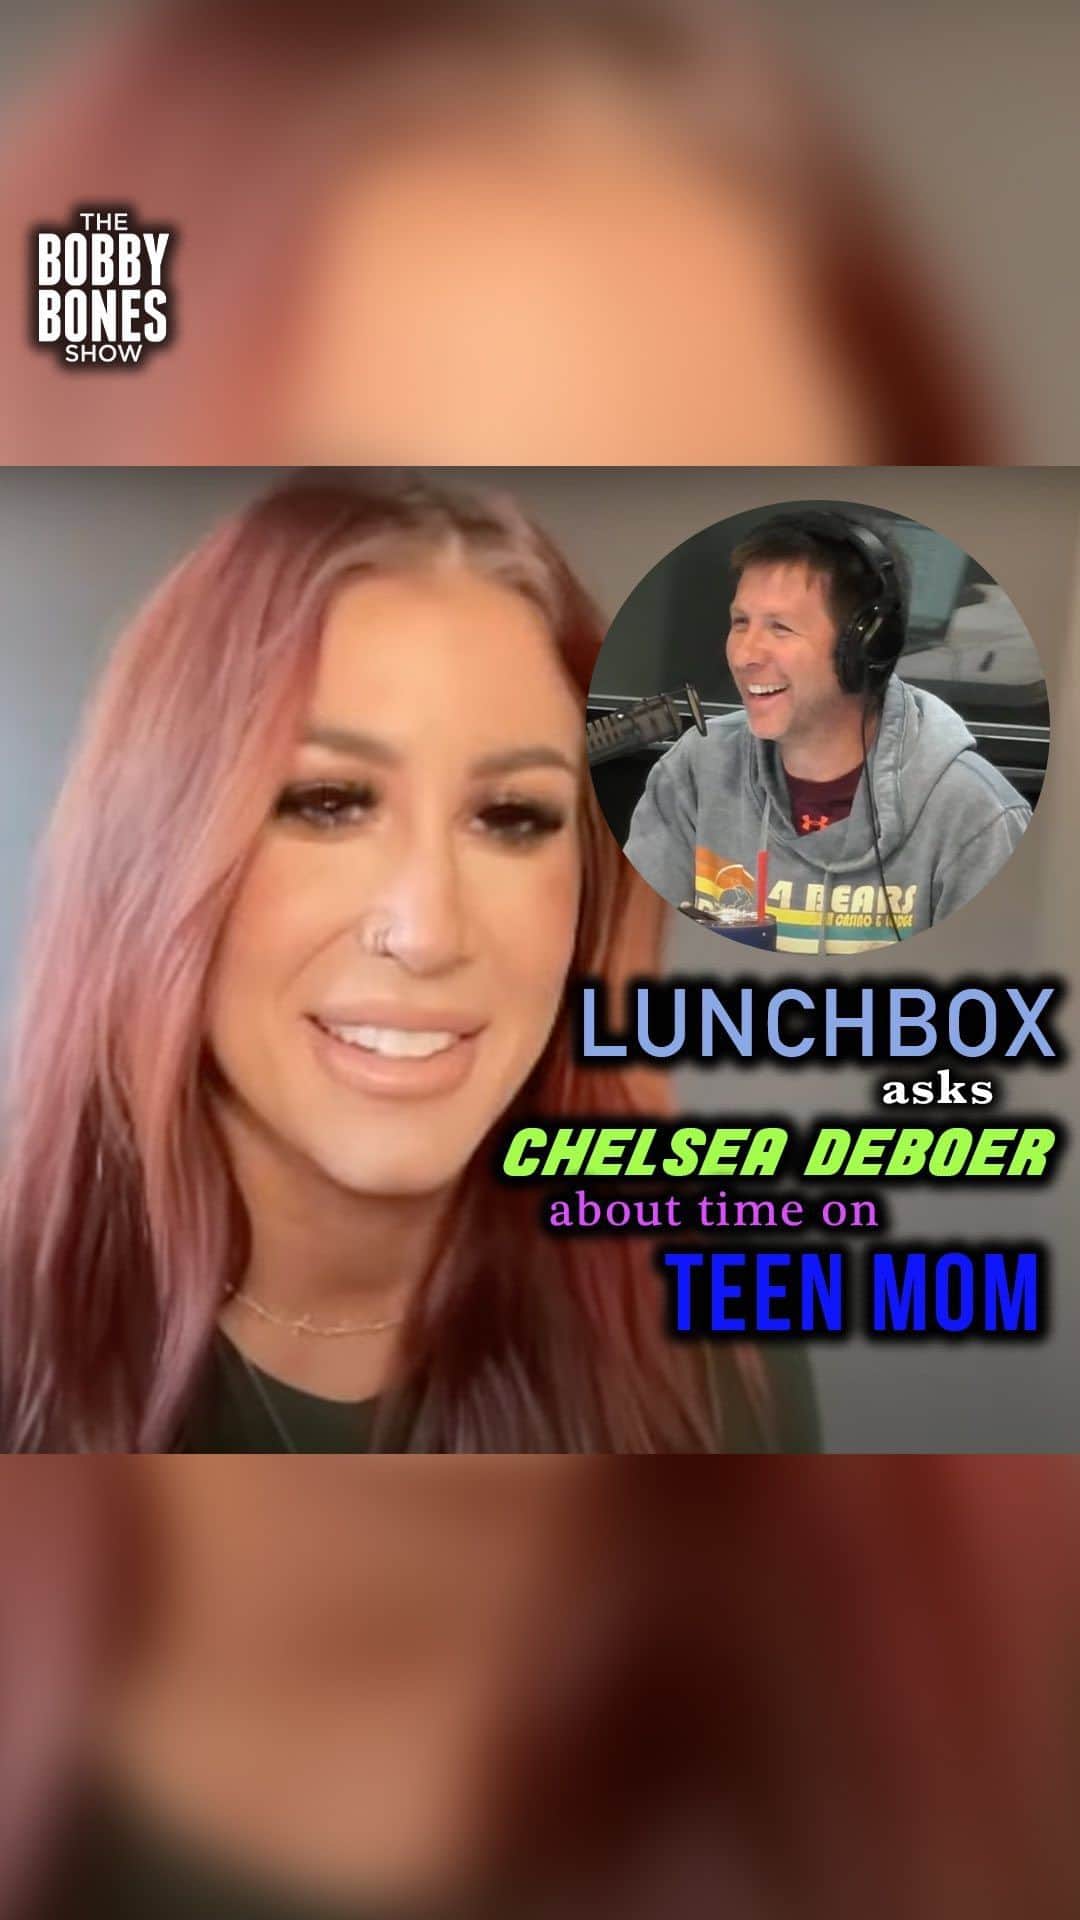 Chelsea Houskaのインスタグラム：「@RadioLunchbox couldn’t wait to ask @chelseahouska about her time on ‘Teen Mom!’ Watch the full interview at bobbybones.com (link in bio!)」